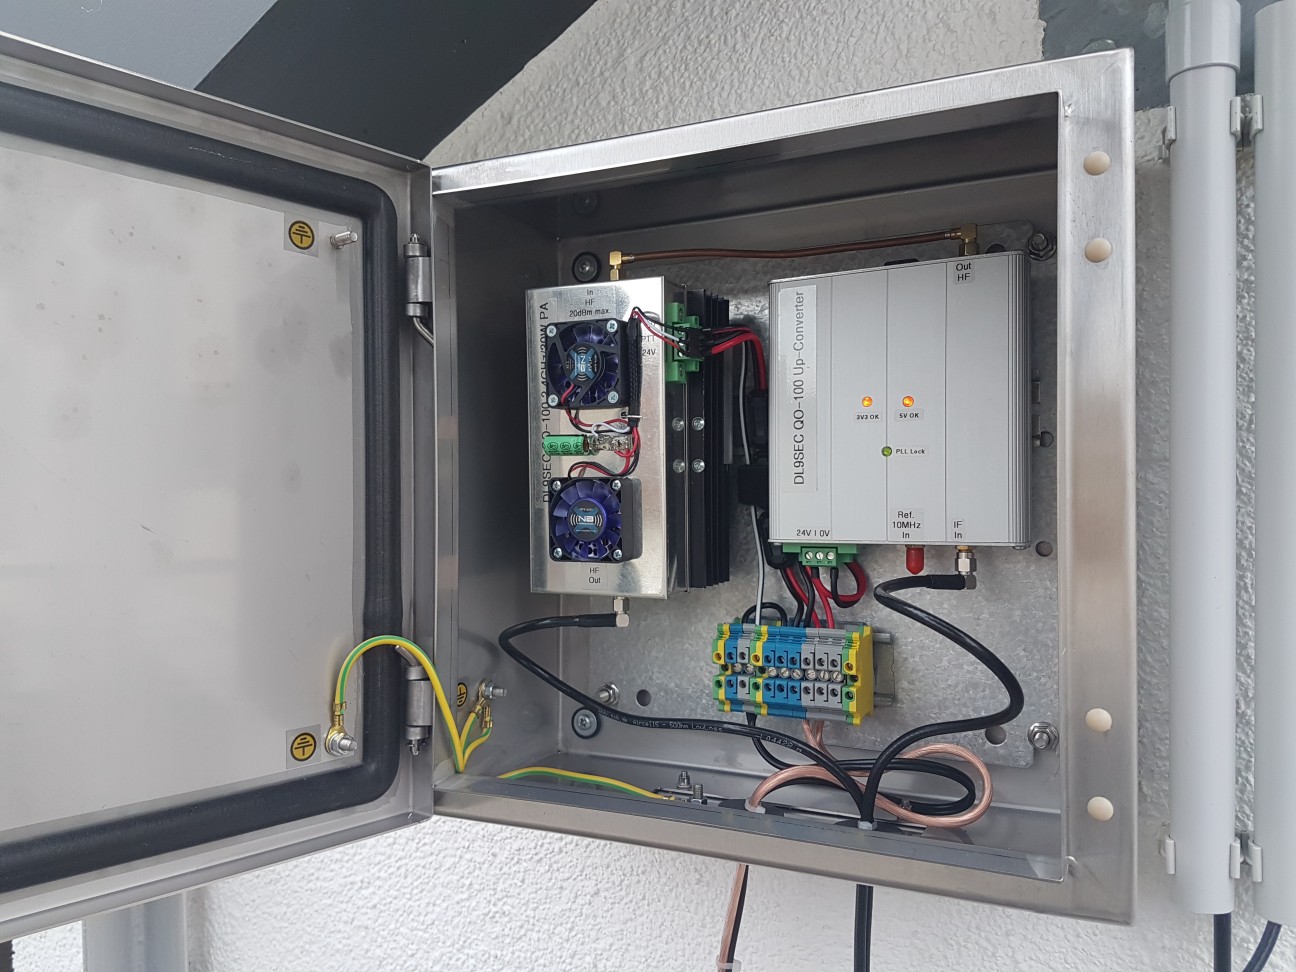 Cabinet with up-converter and PA